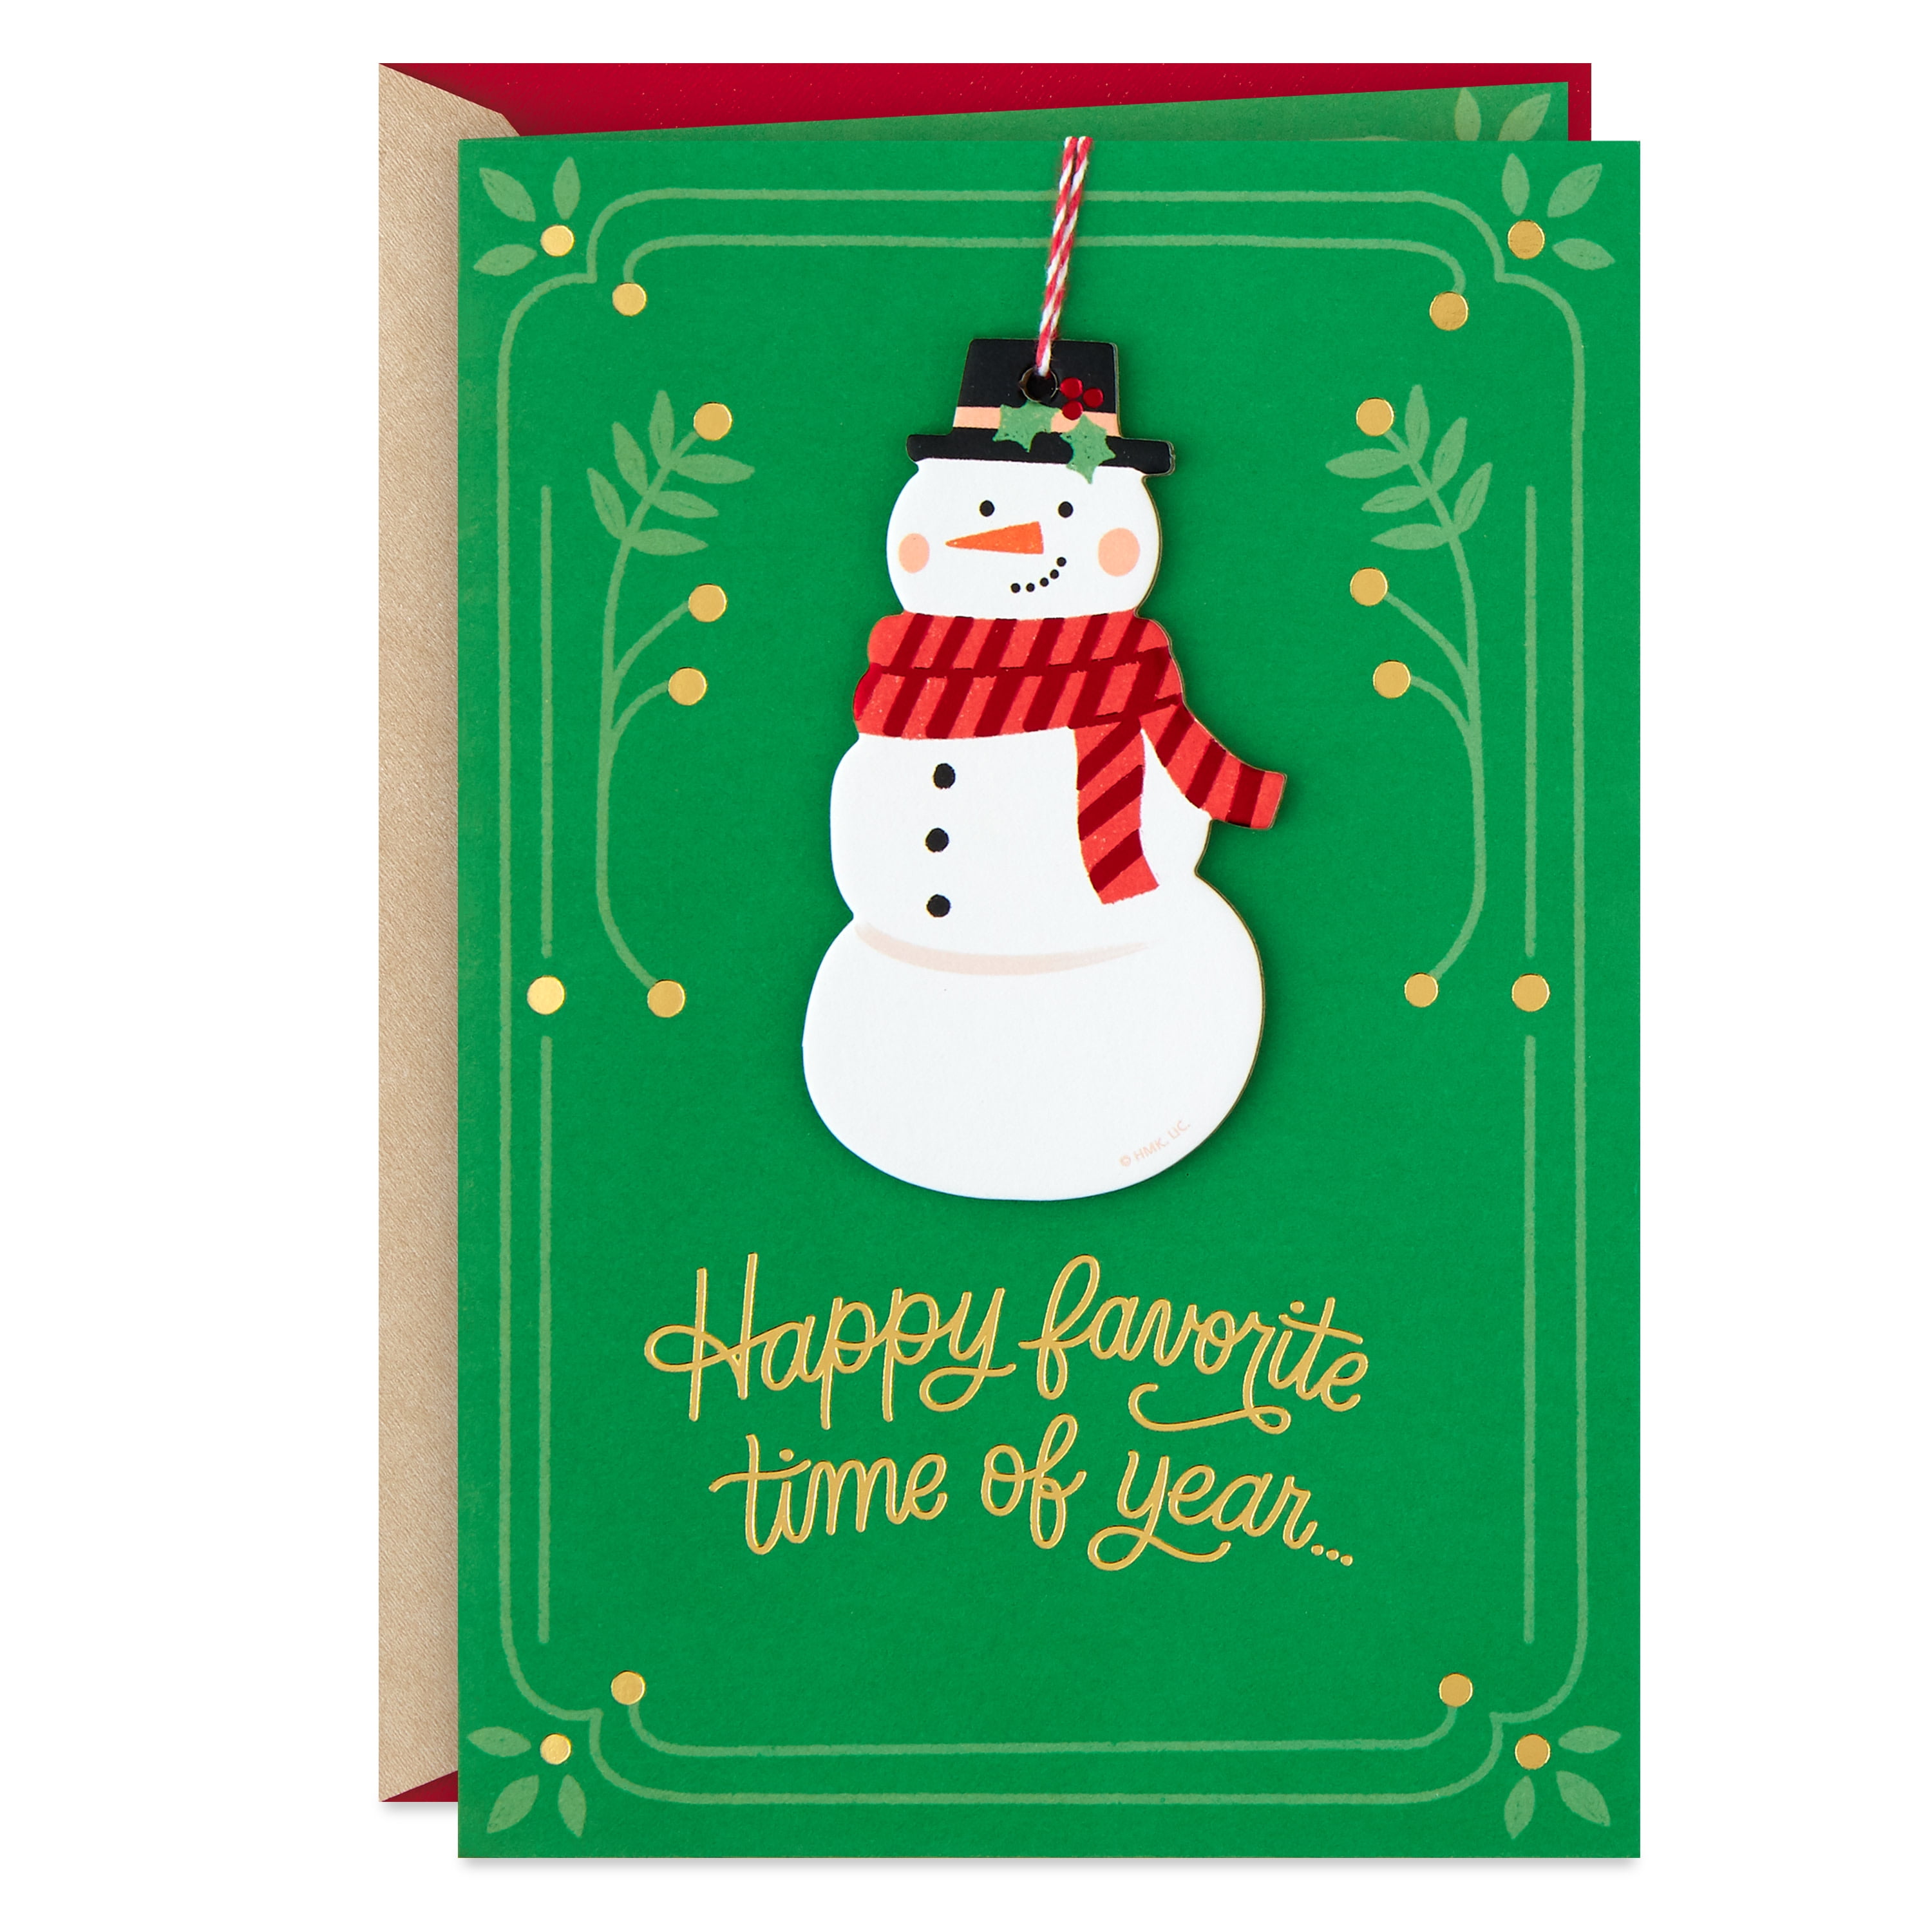 Christmas Card for Wife from Hallmark Watercolour Design with Heartfelt Sentiment